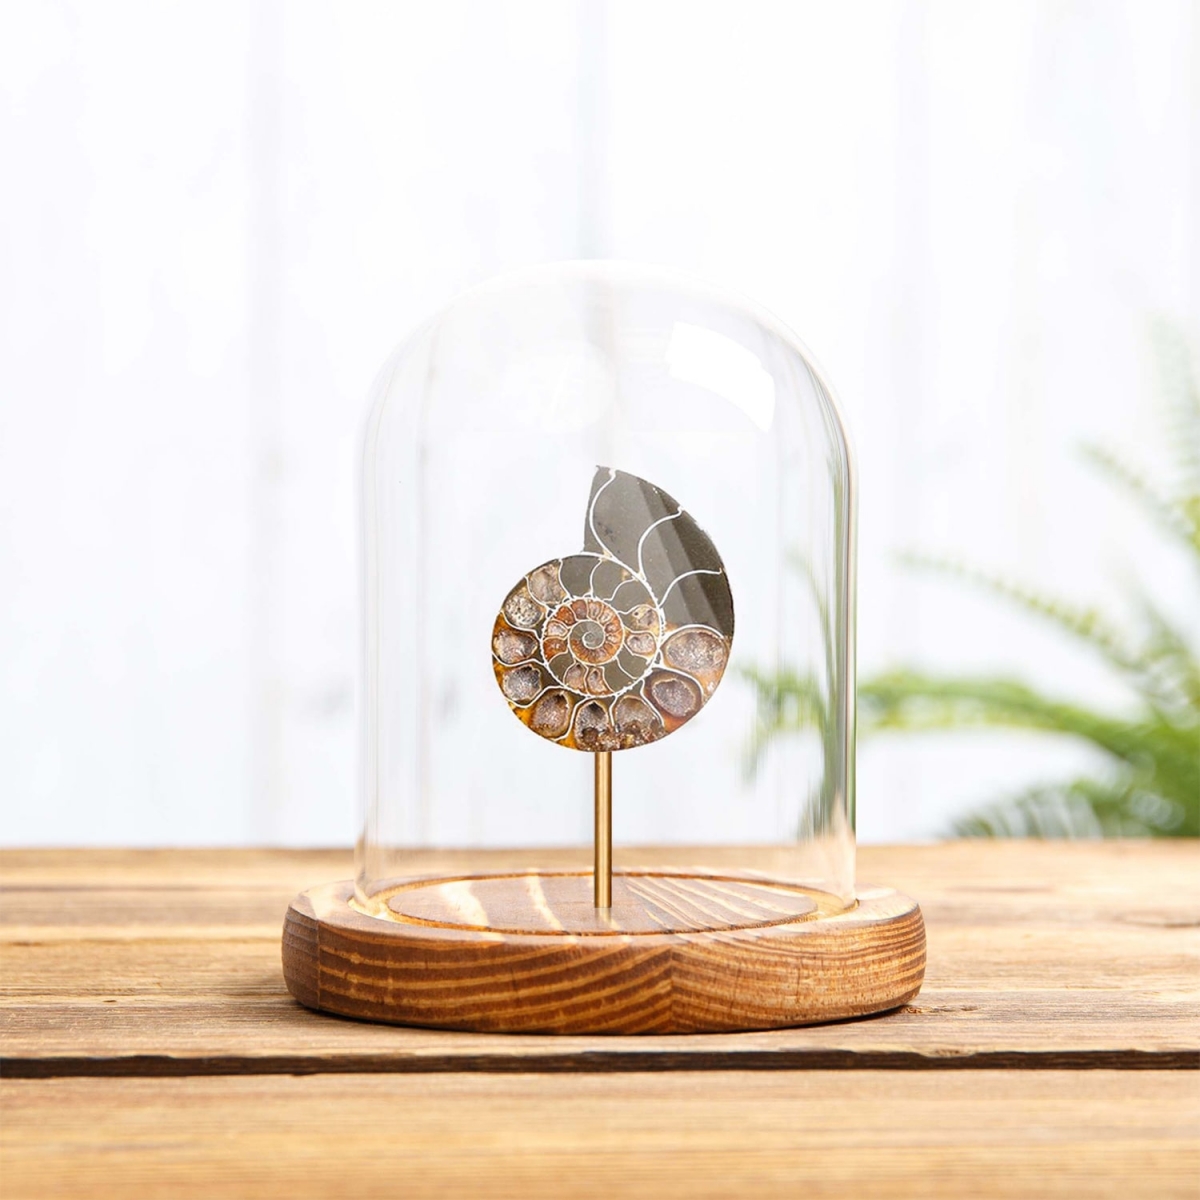 Ammonite Cut and Polished Fossil in Glass Dome with Wooden Base (Cleoniceras sp)